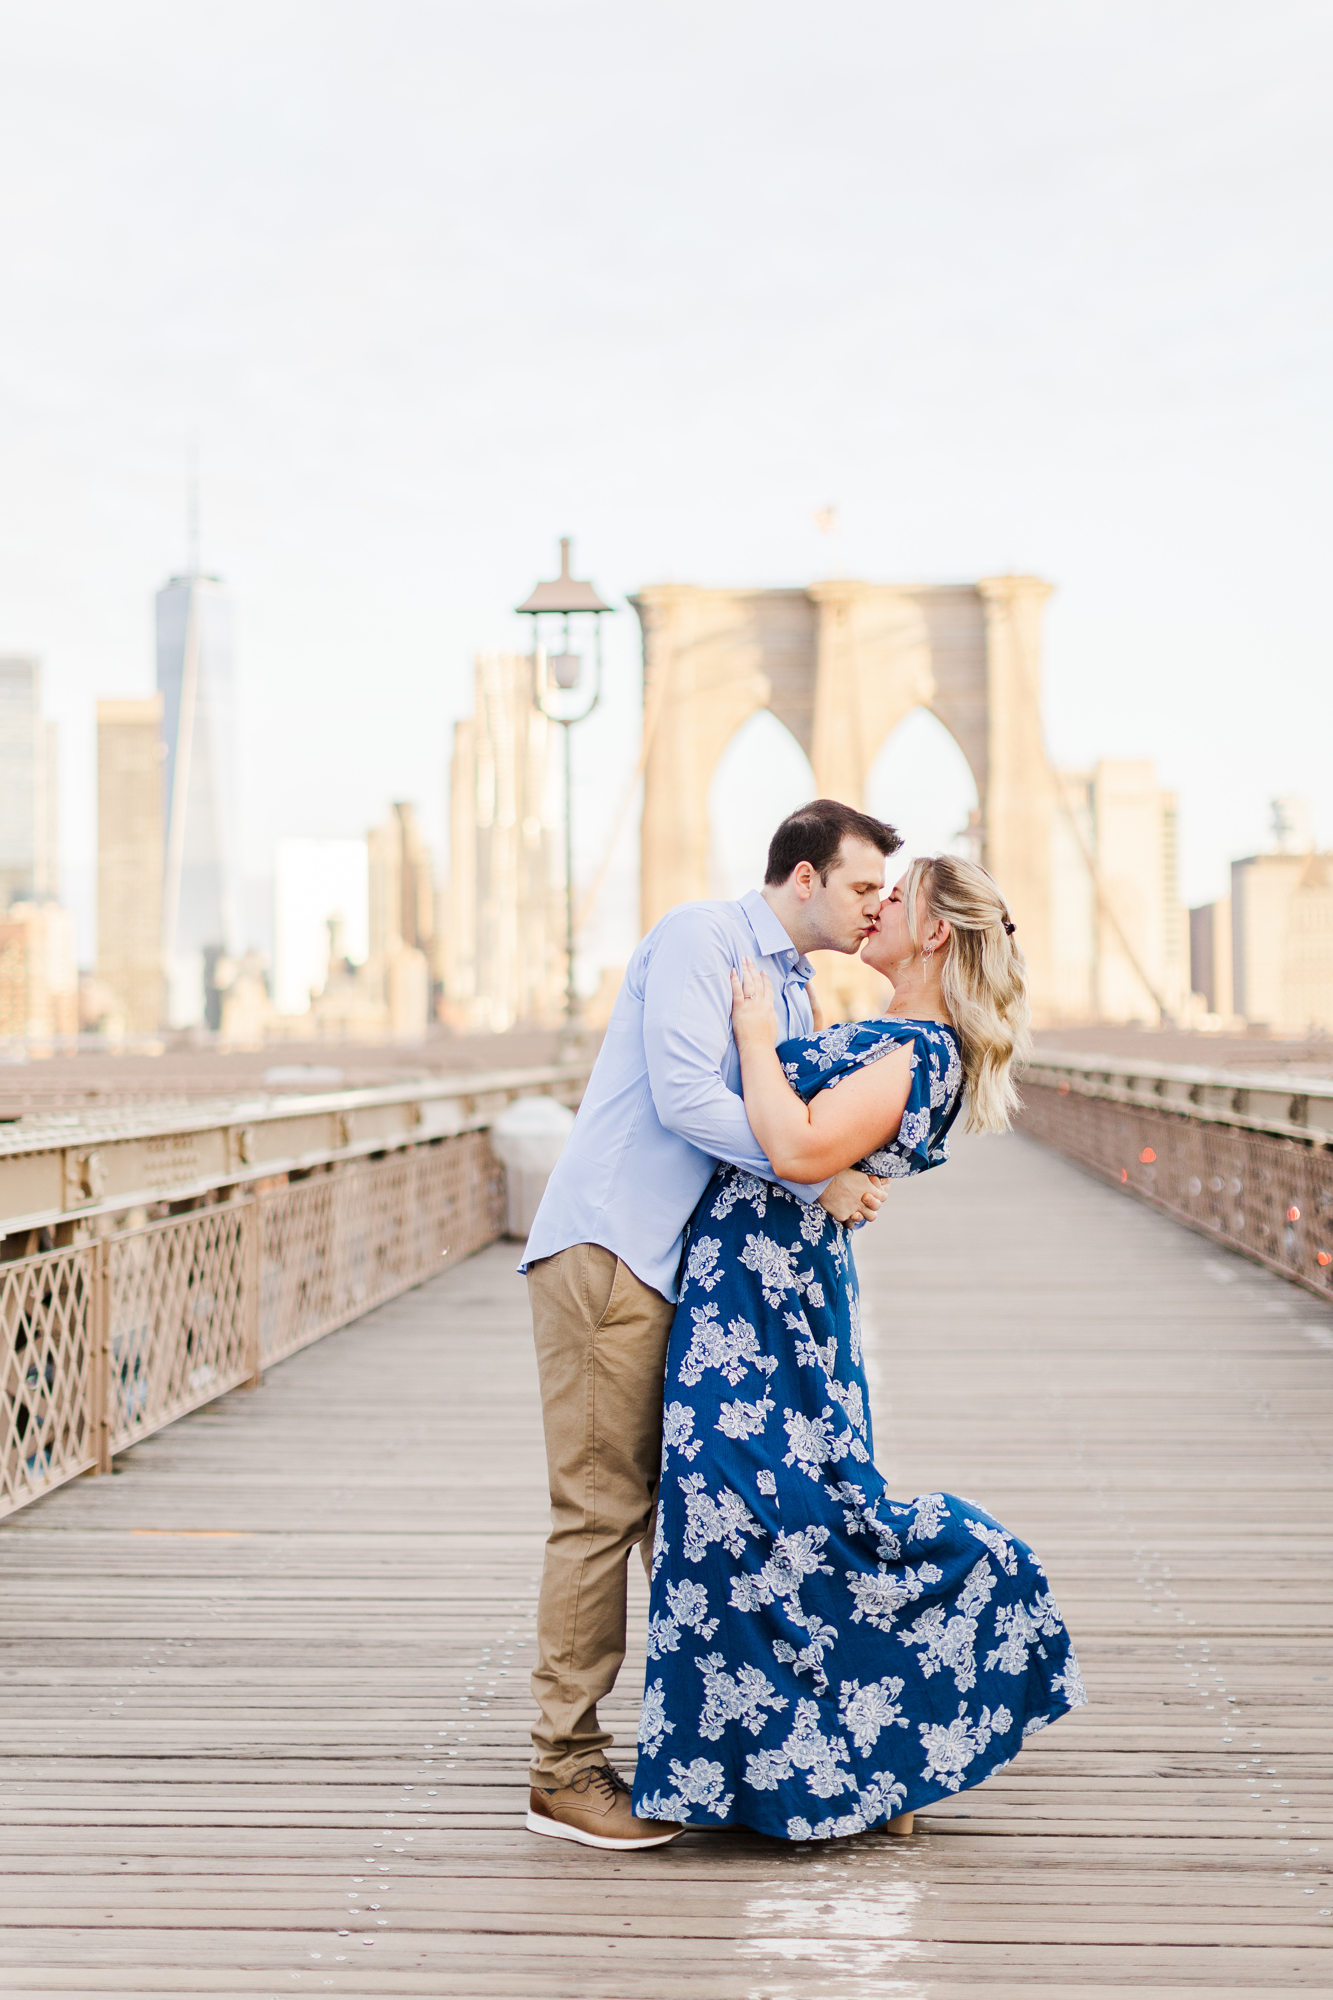 Dazzling Engagement Pictures in DUMBO